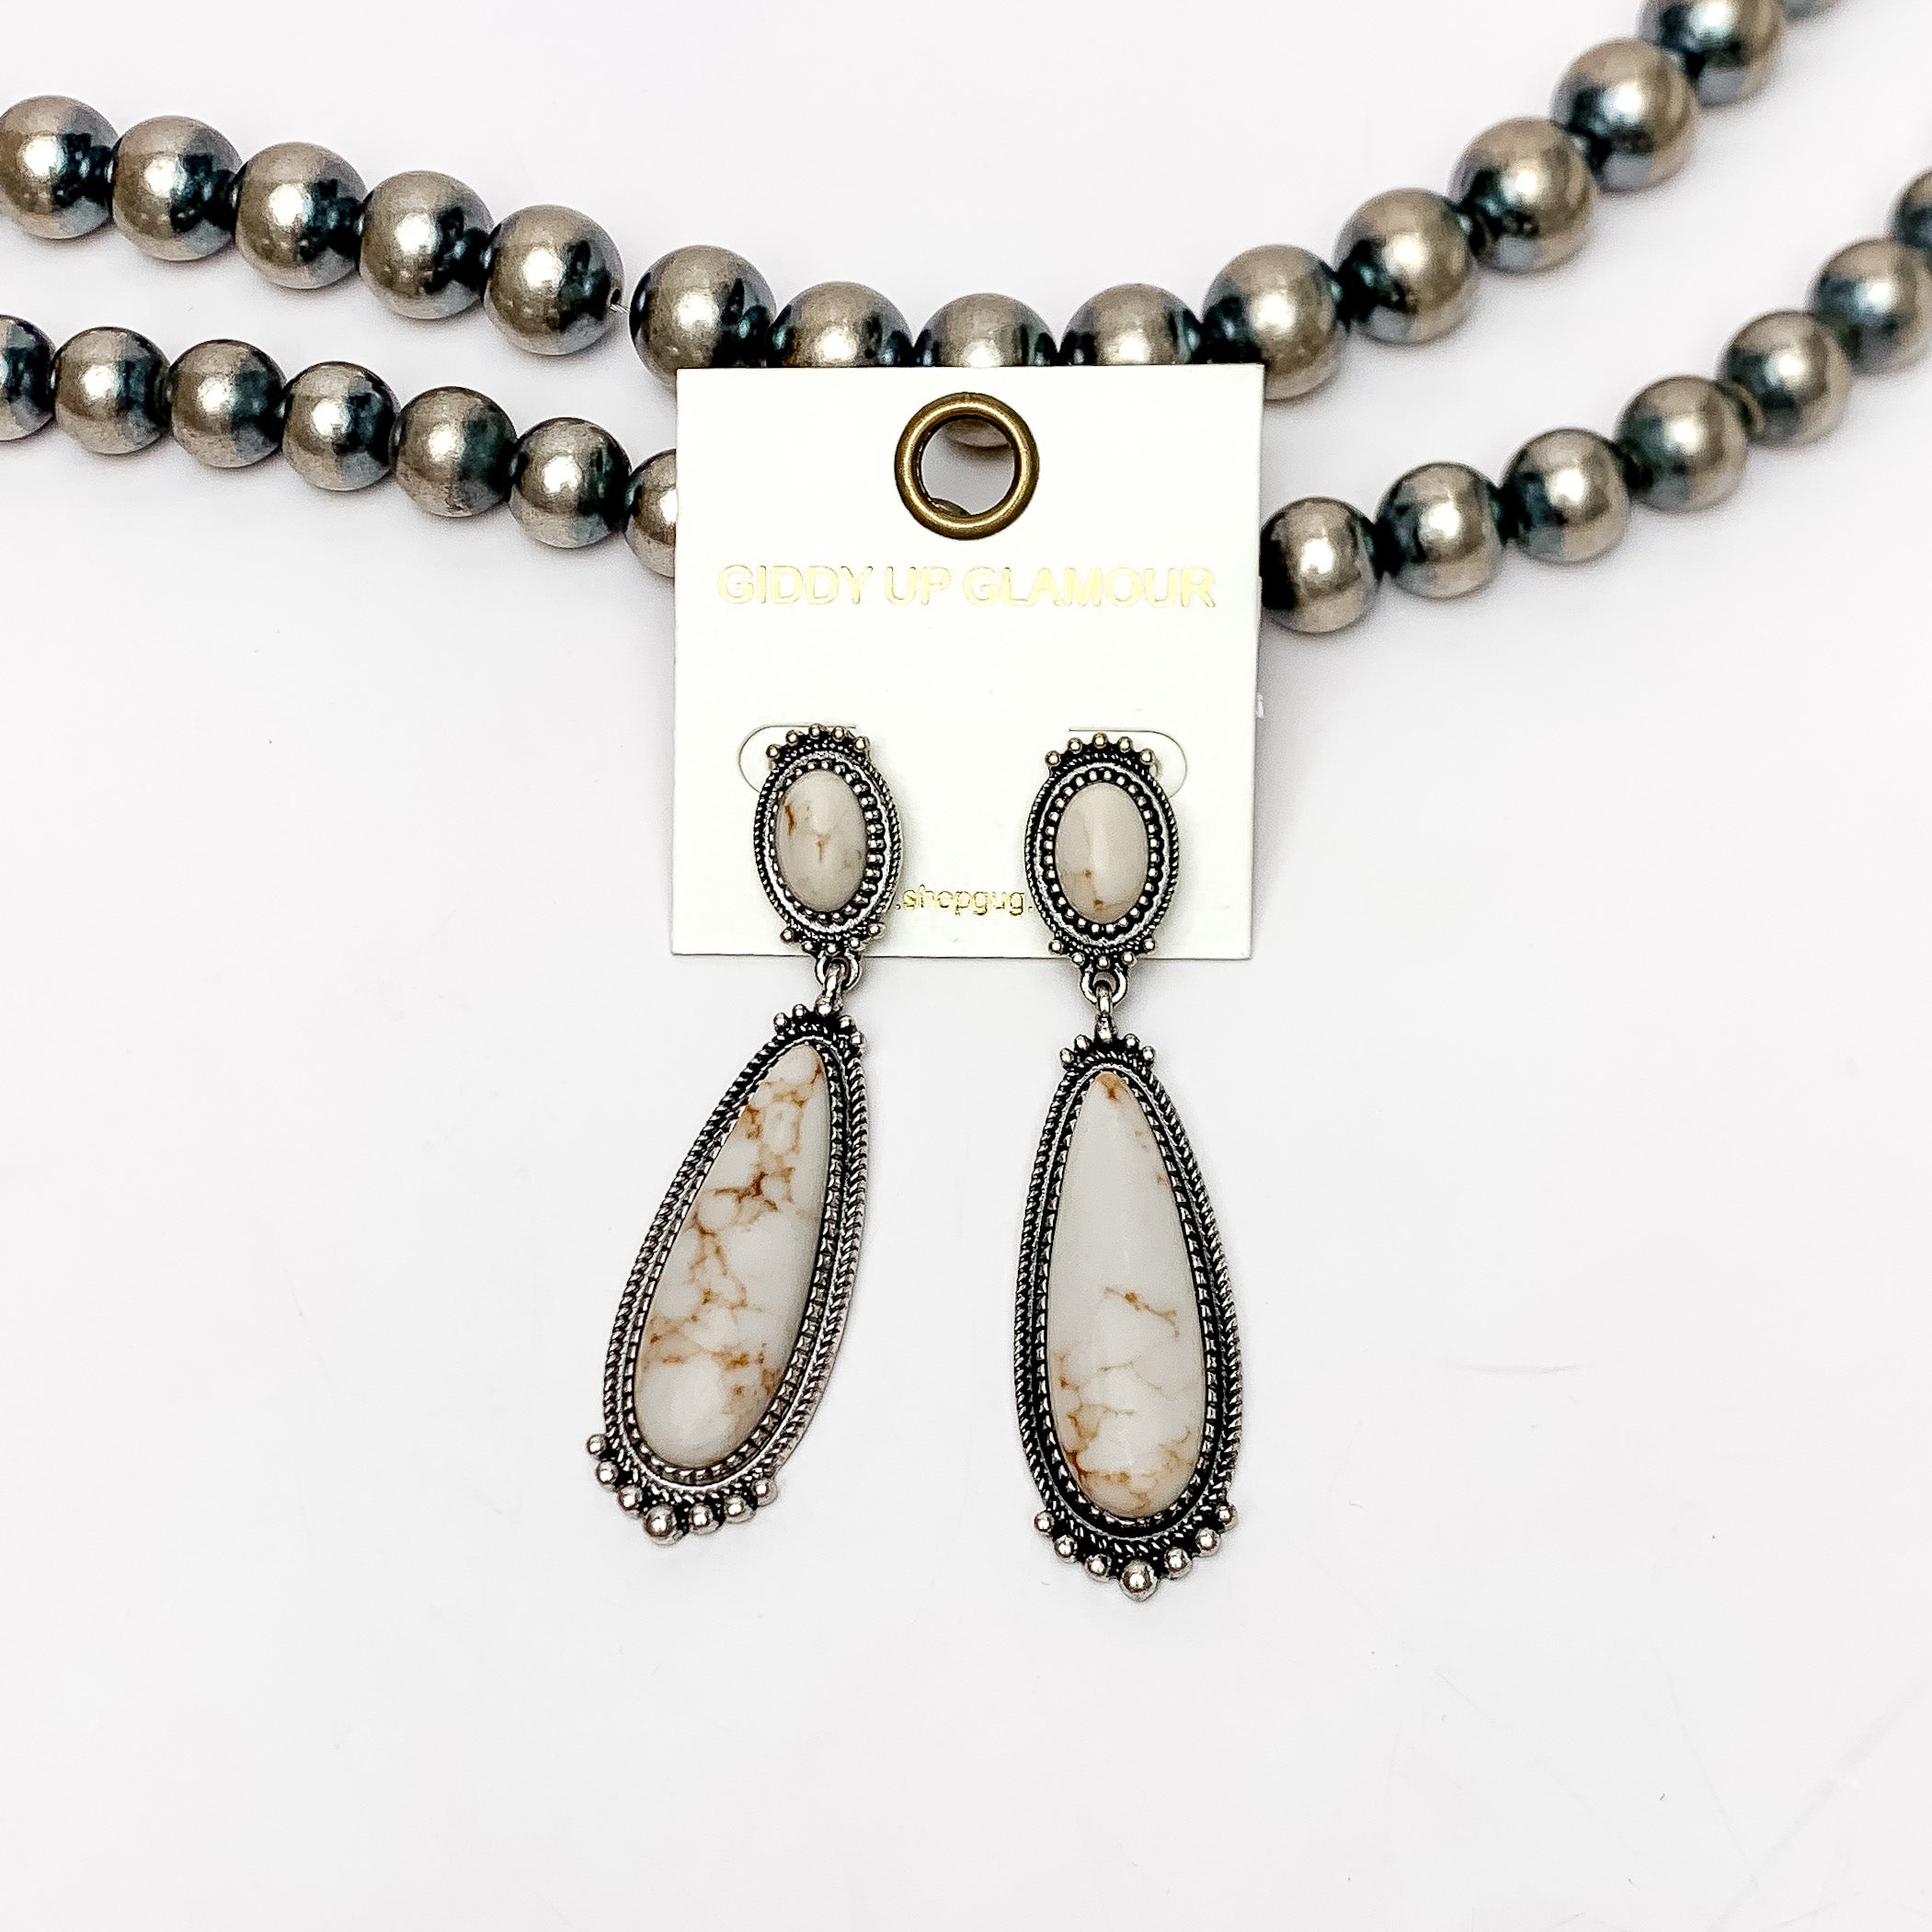 Southern Saturdays Silver Tone Drop Earrings in Ivory. These earrings featured two large stones. The background of the picture is white and the earrings are laying against Navajo pearls.